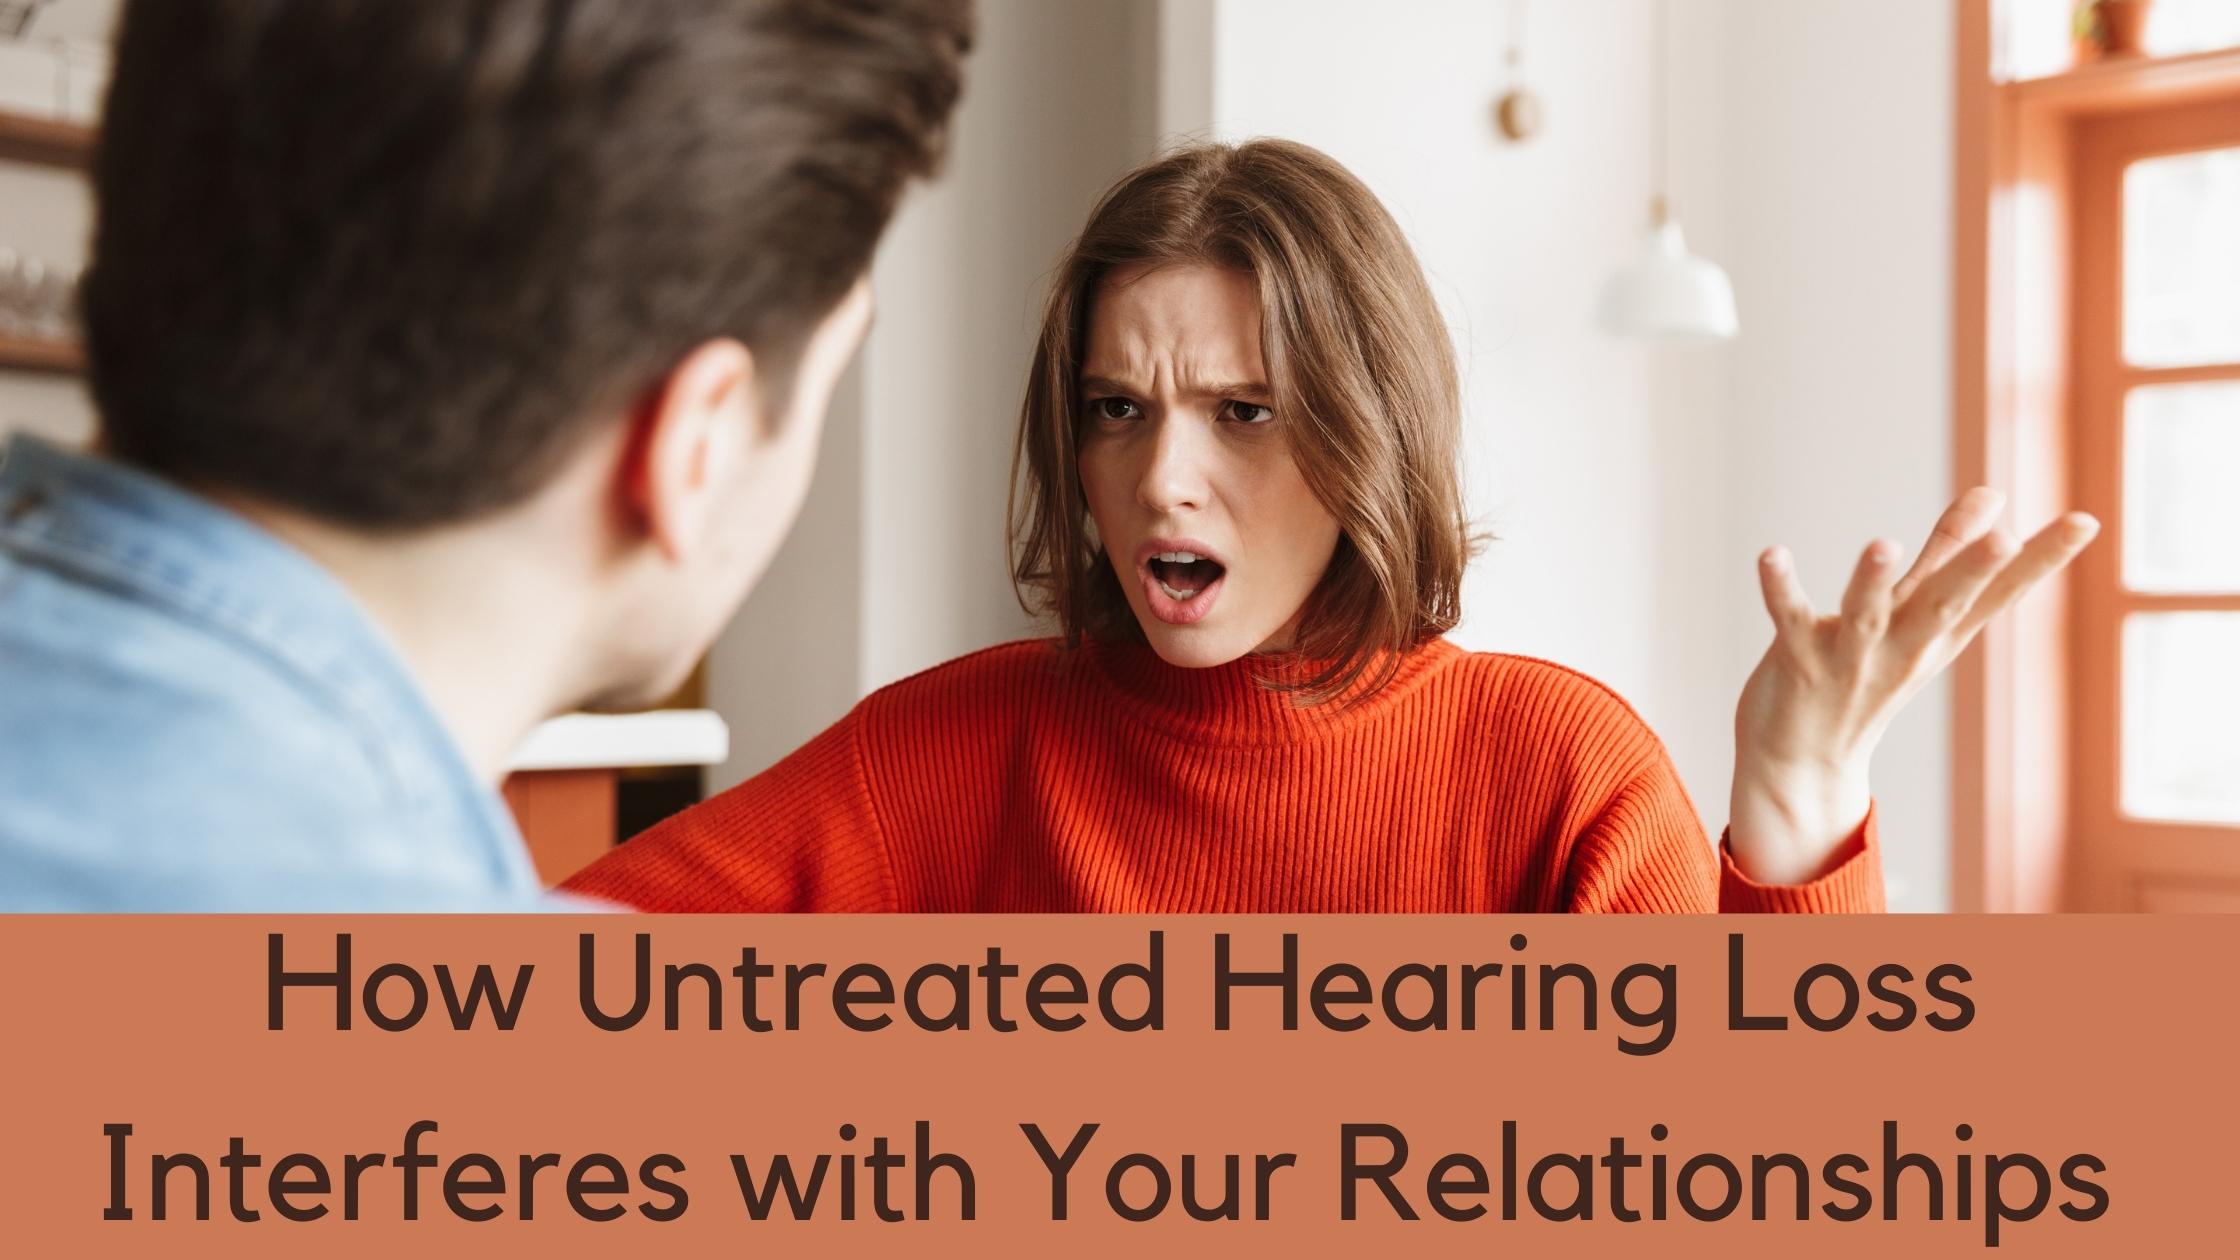 Featured image for “How Untreated Hearing Loss Interferes with Your Relationships”